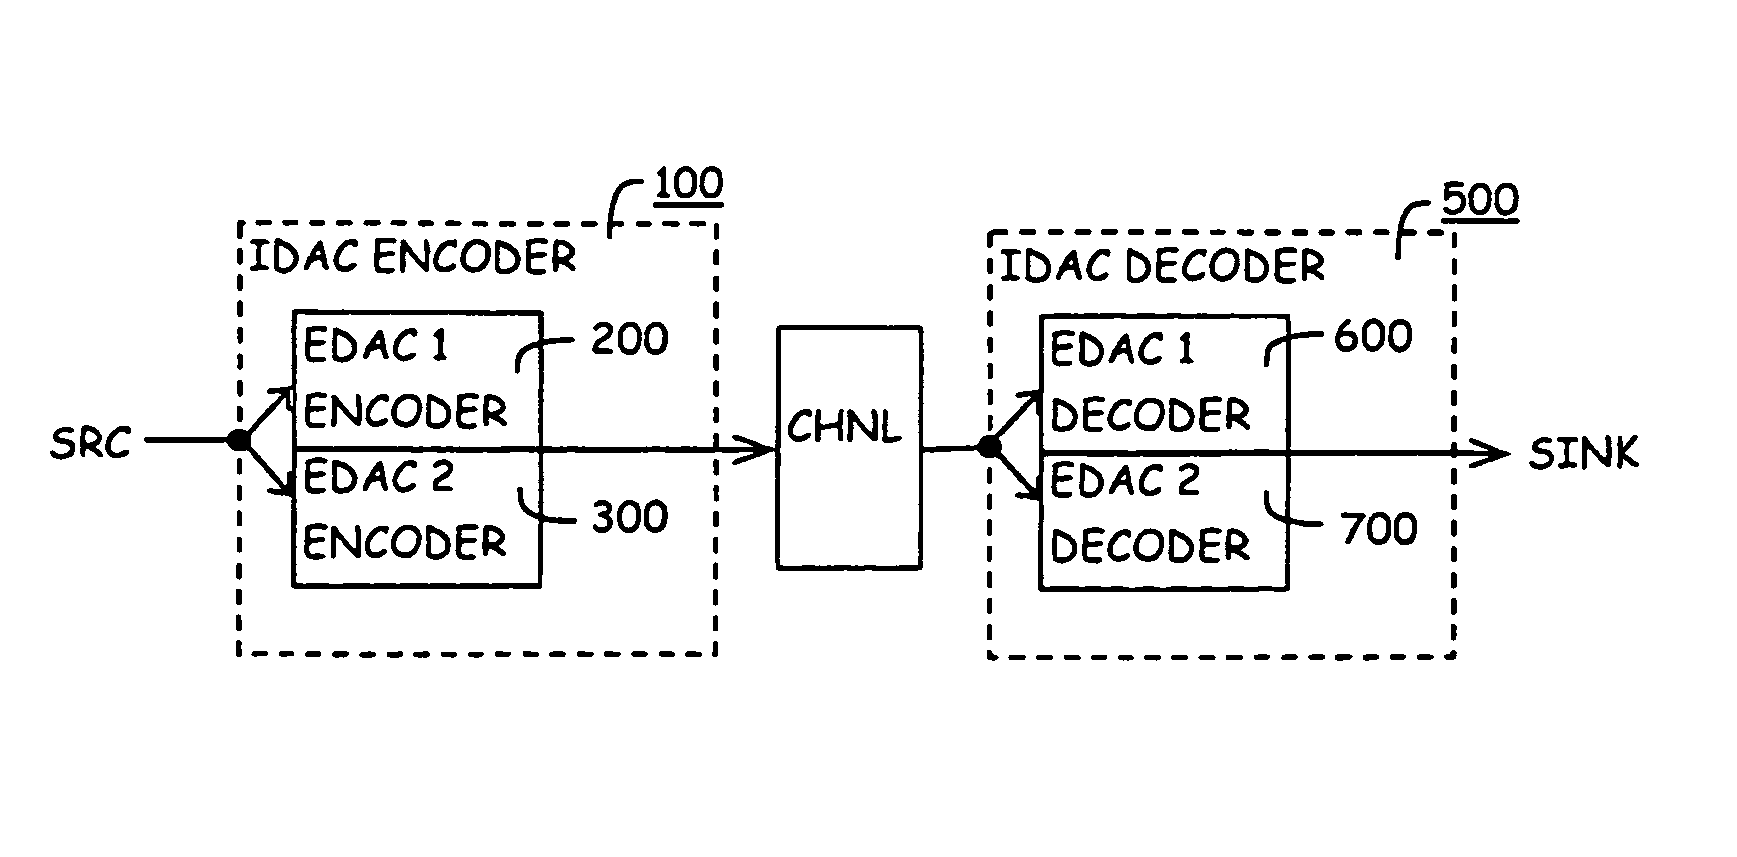 Method of identifying and protecting the integrity of a set of source data